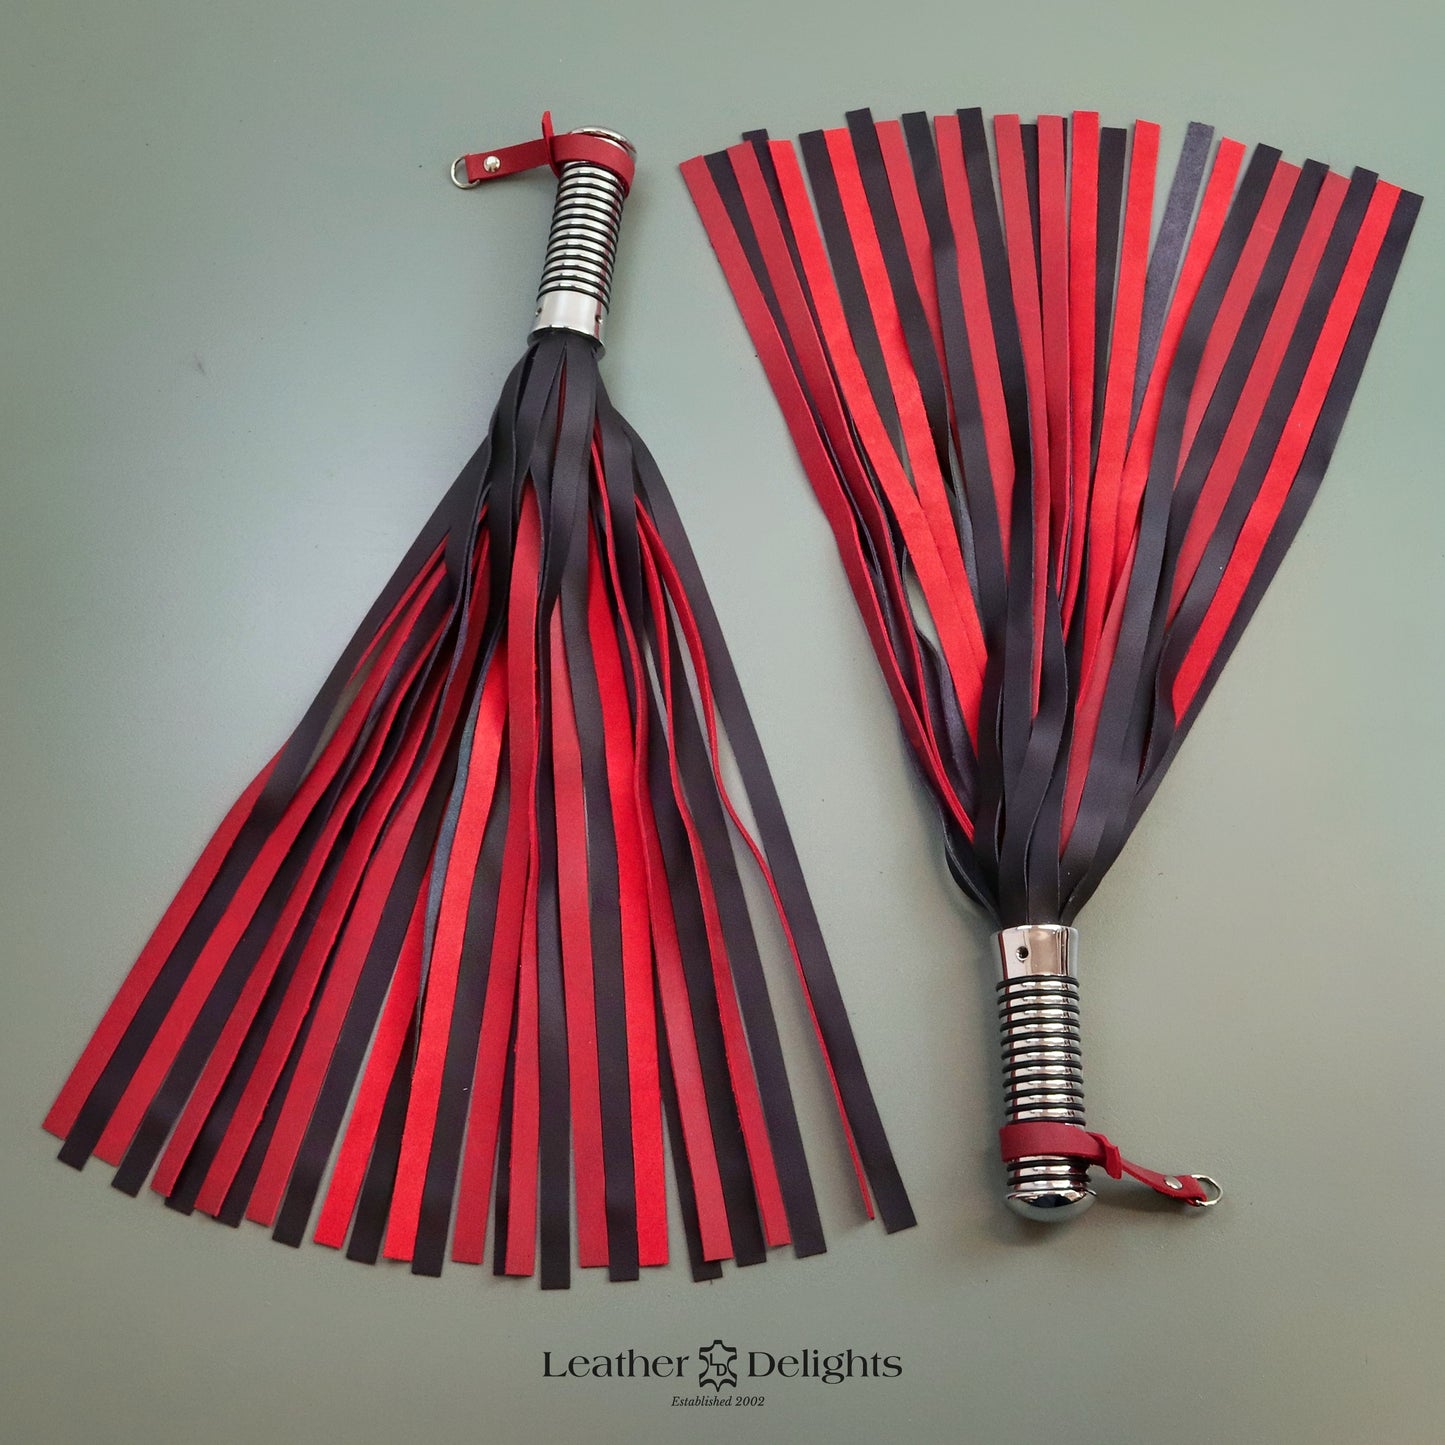 Pair of Black & Red Leather Floggers with Chrome Handle